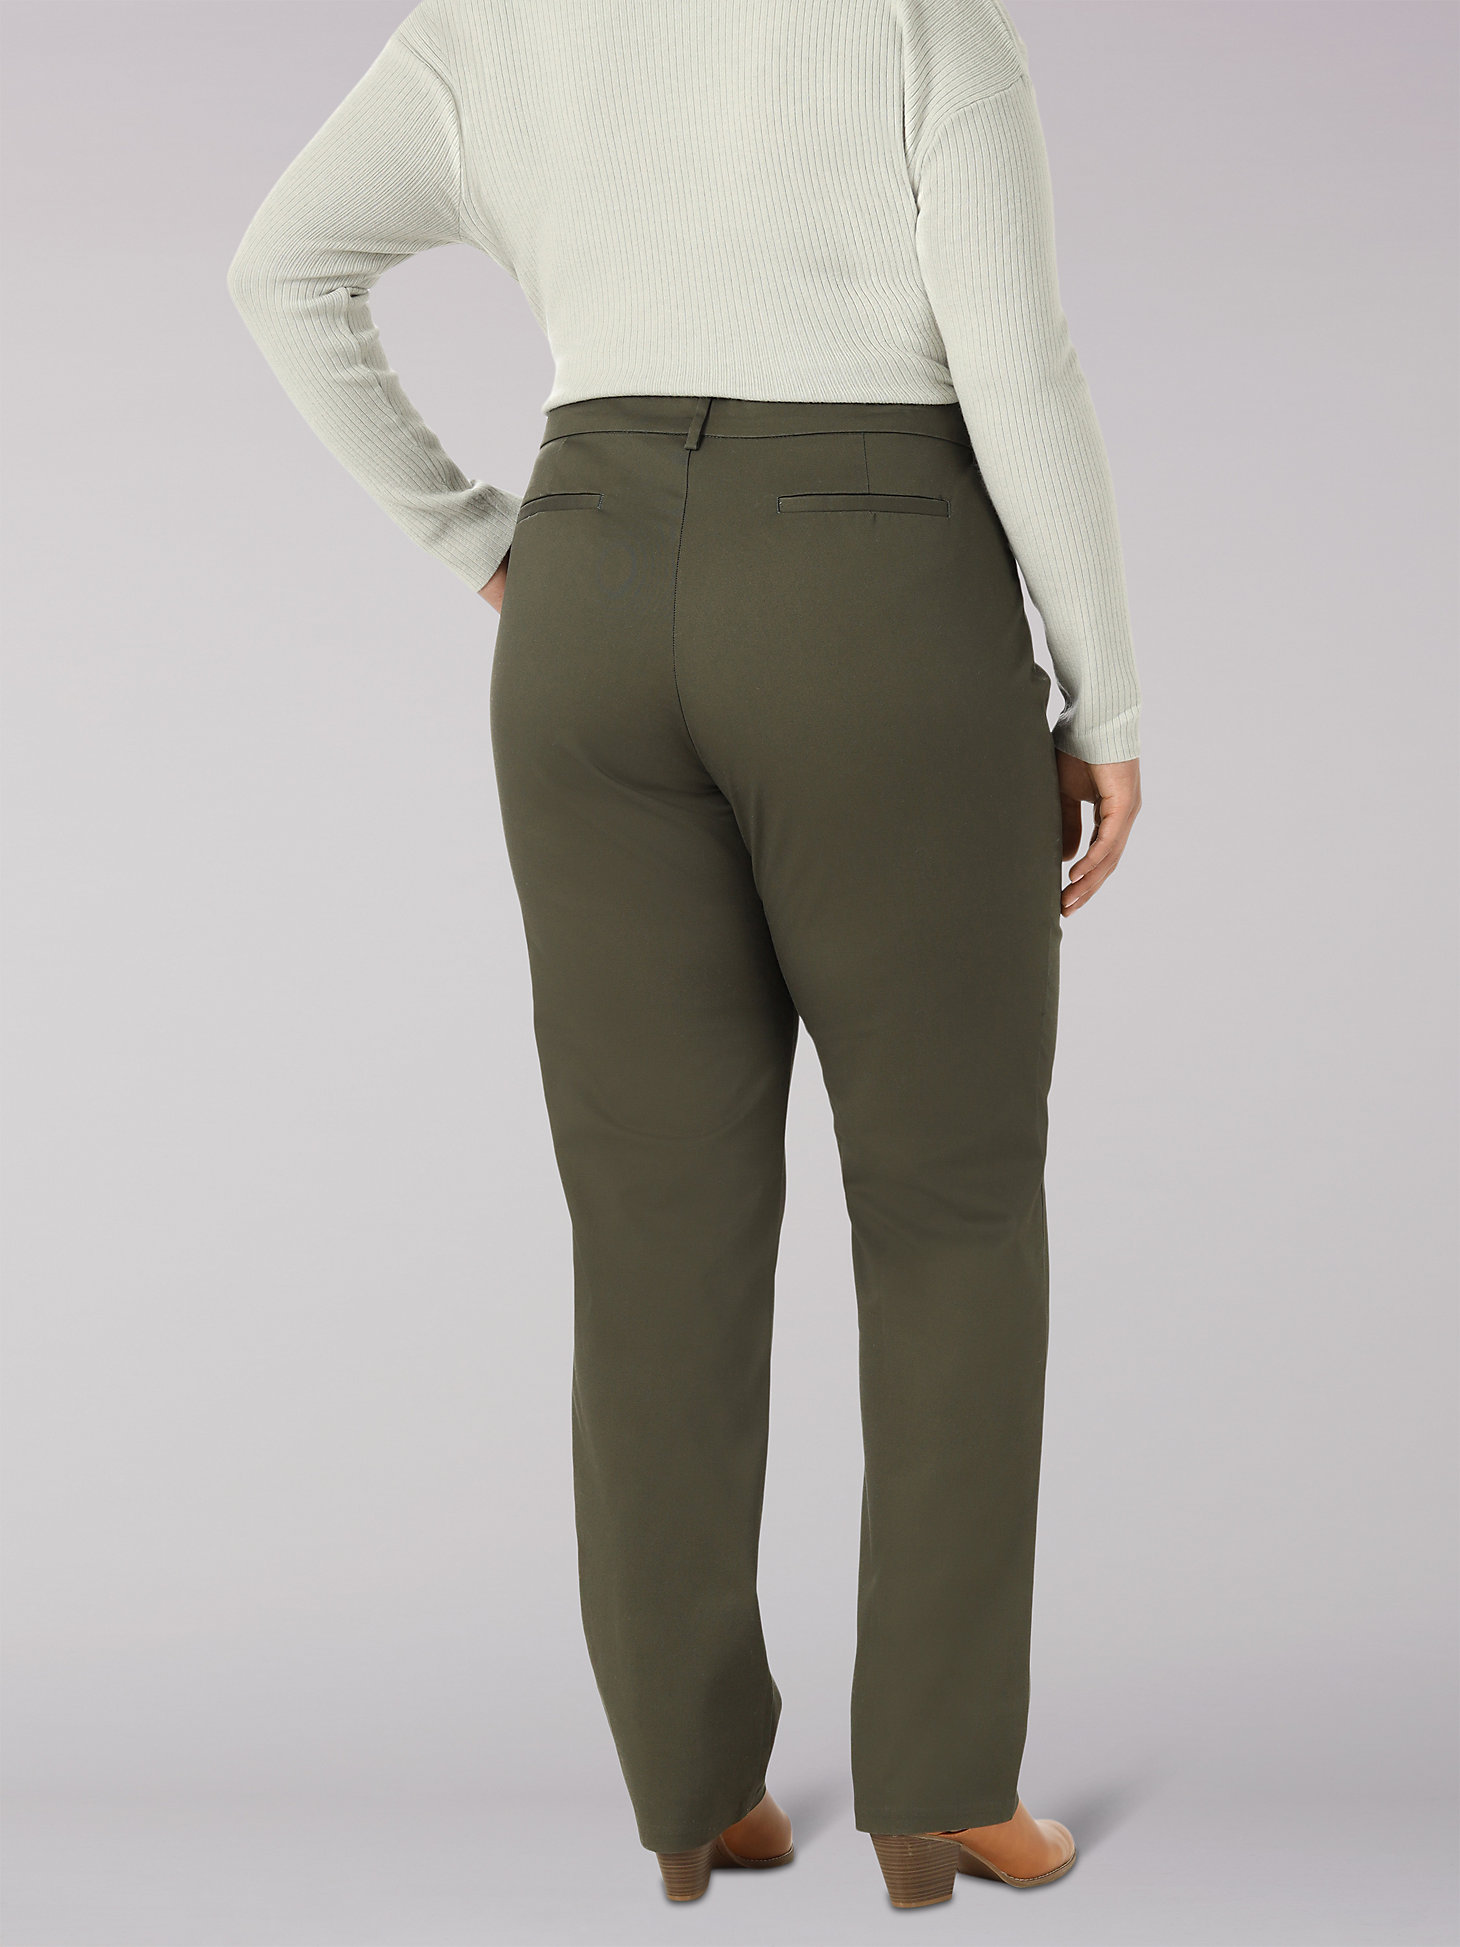 Women's Wrinkle Free Relaxed Fit Straight Leg Pant (Plus) in Frontier Olive alternative view 1